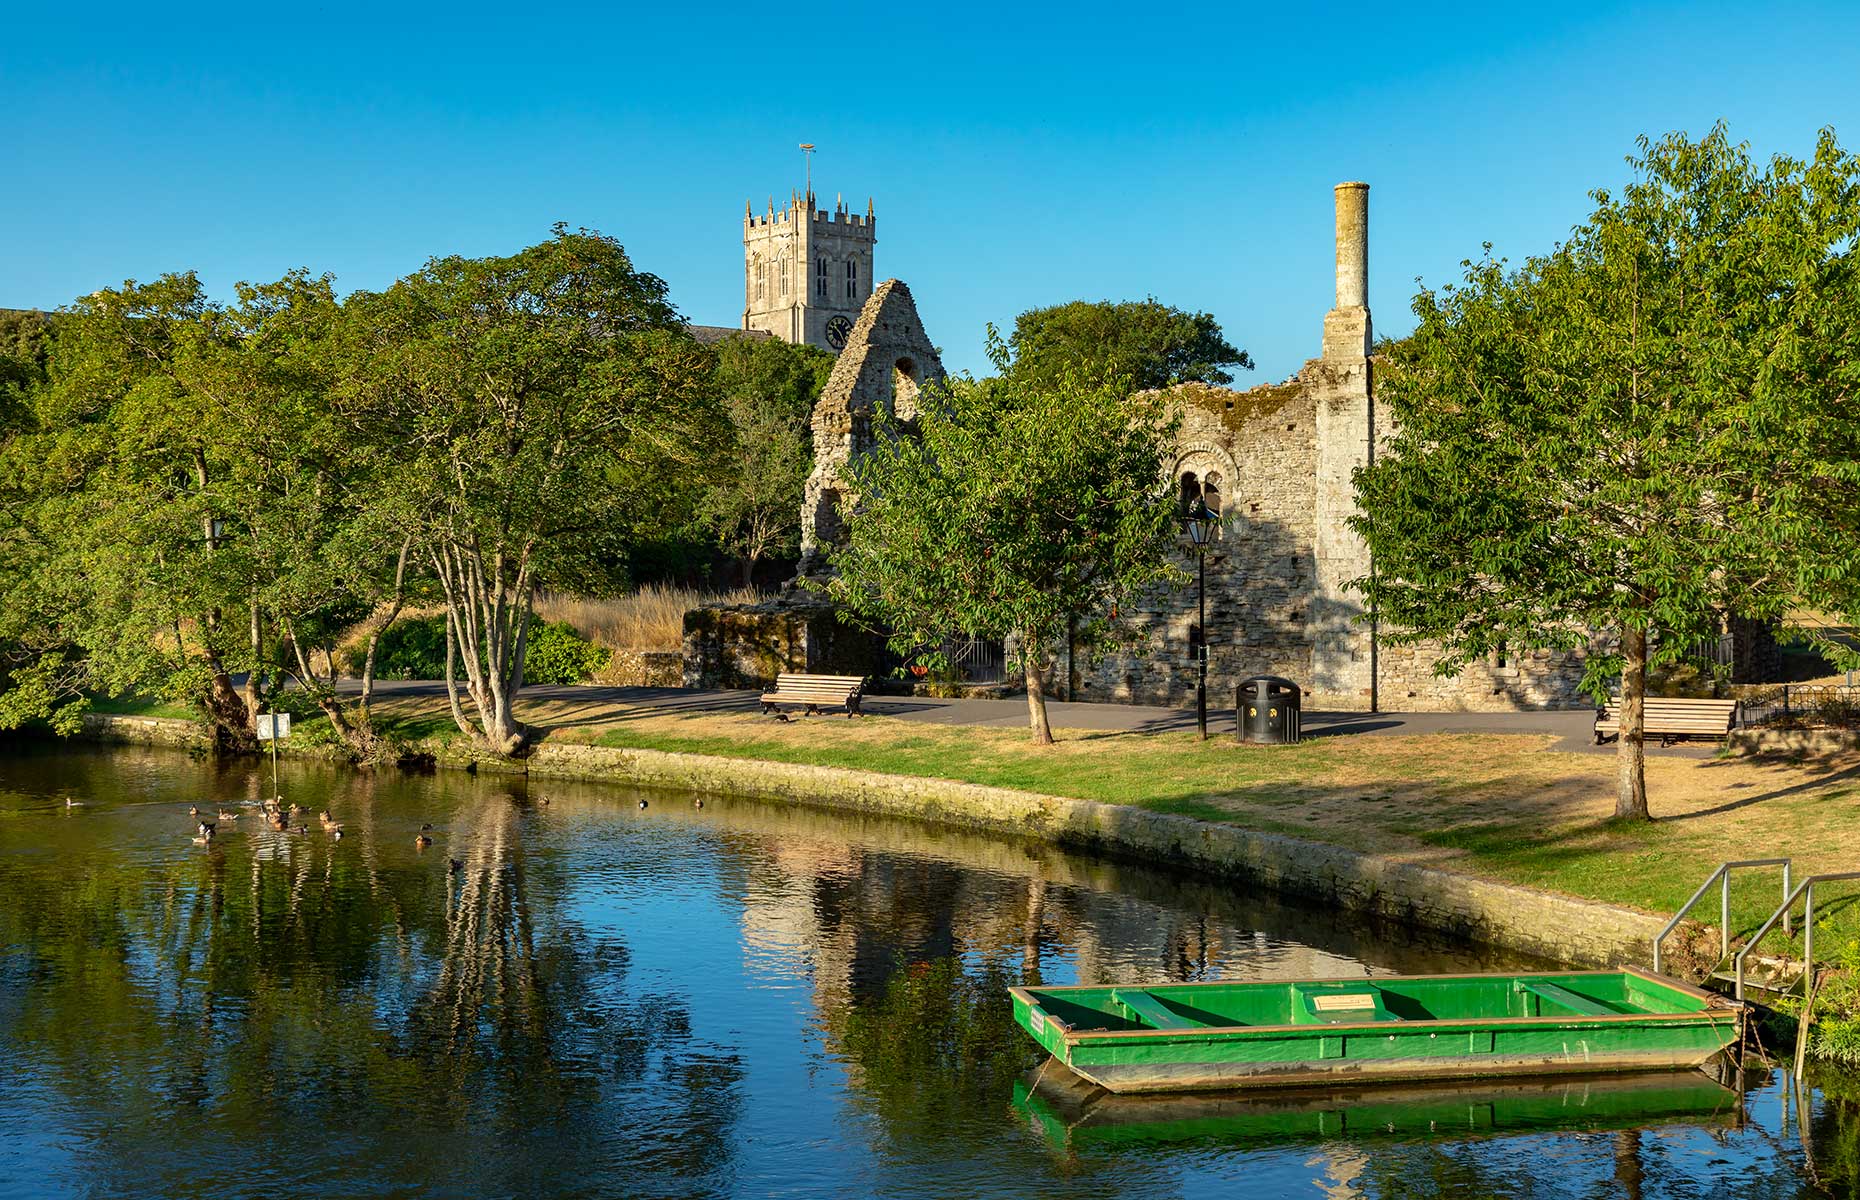 Christchurch Priory and surrounding ruins in Dorset (Image credit: Adrian Baker/Shutterstock)